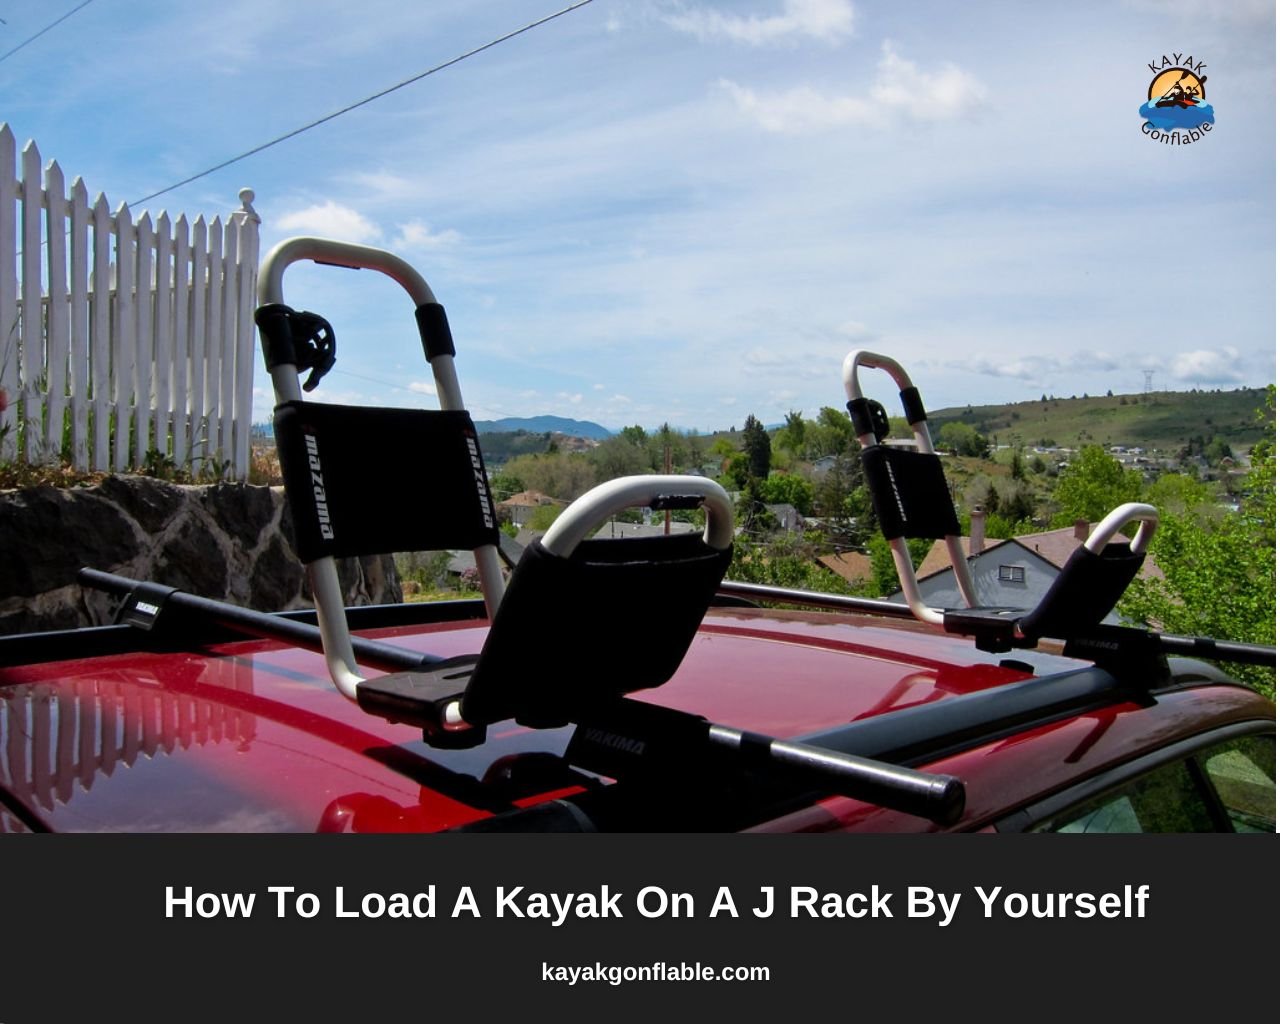 How To Load A Kayak On J Rack By Yourself